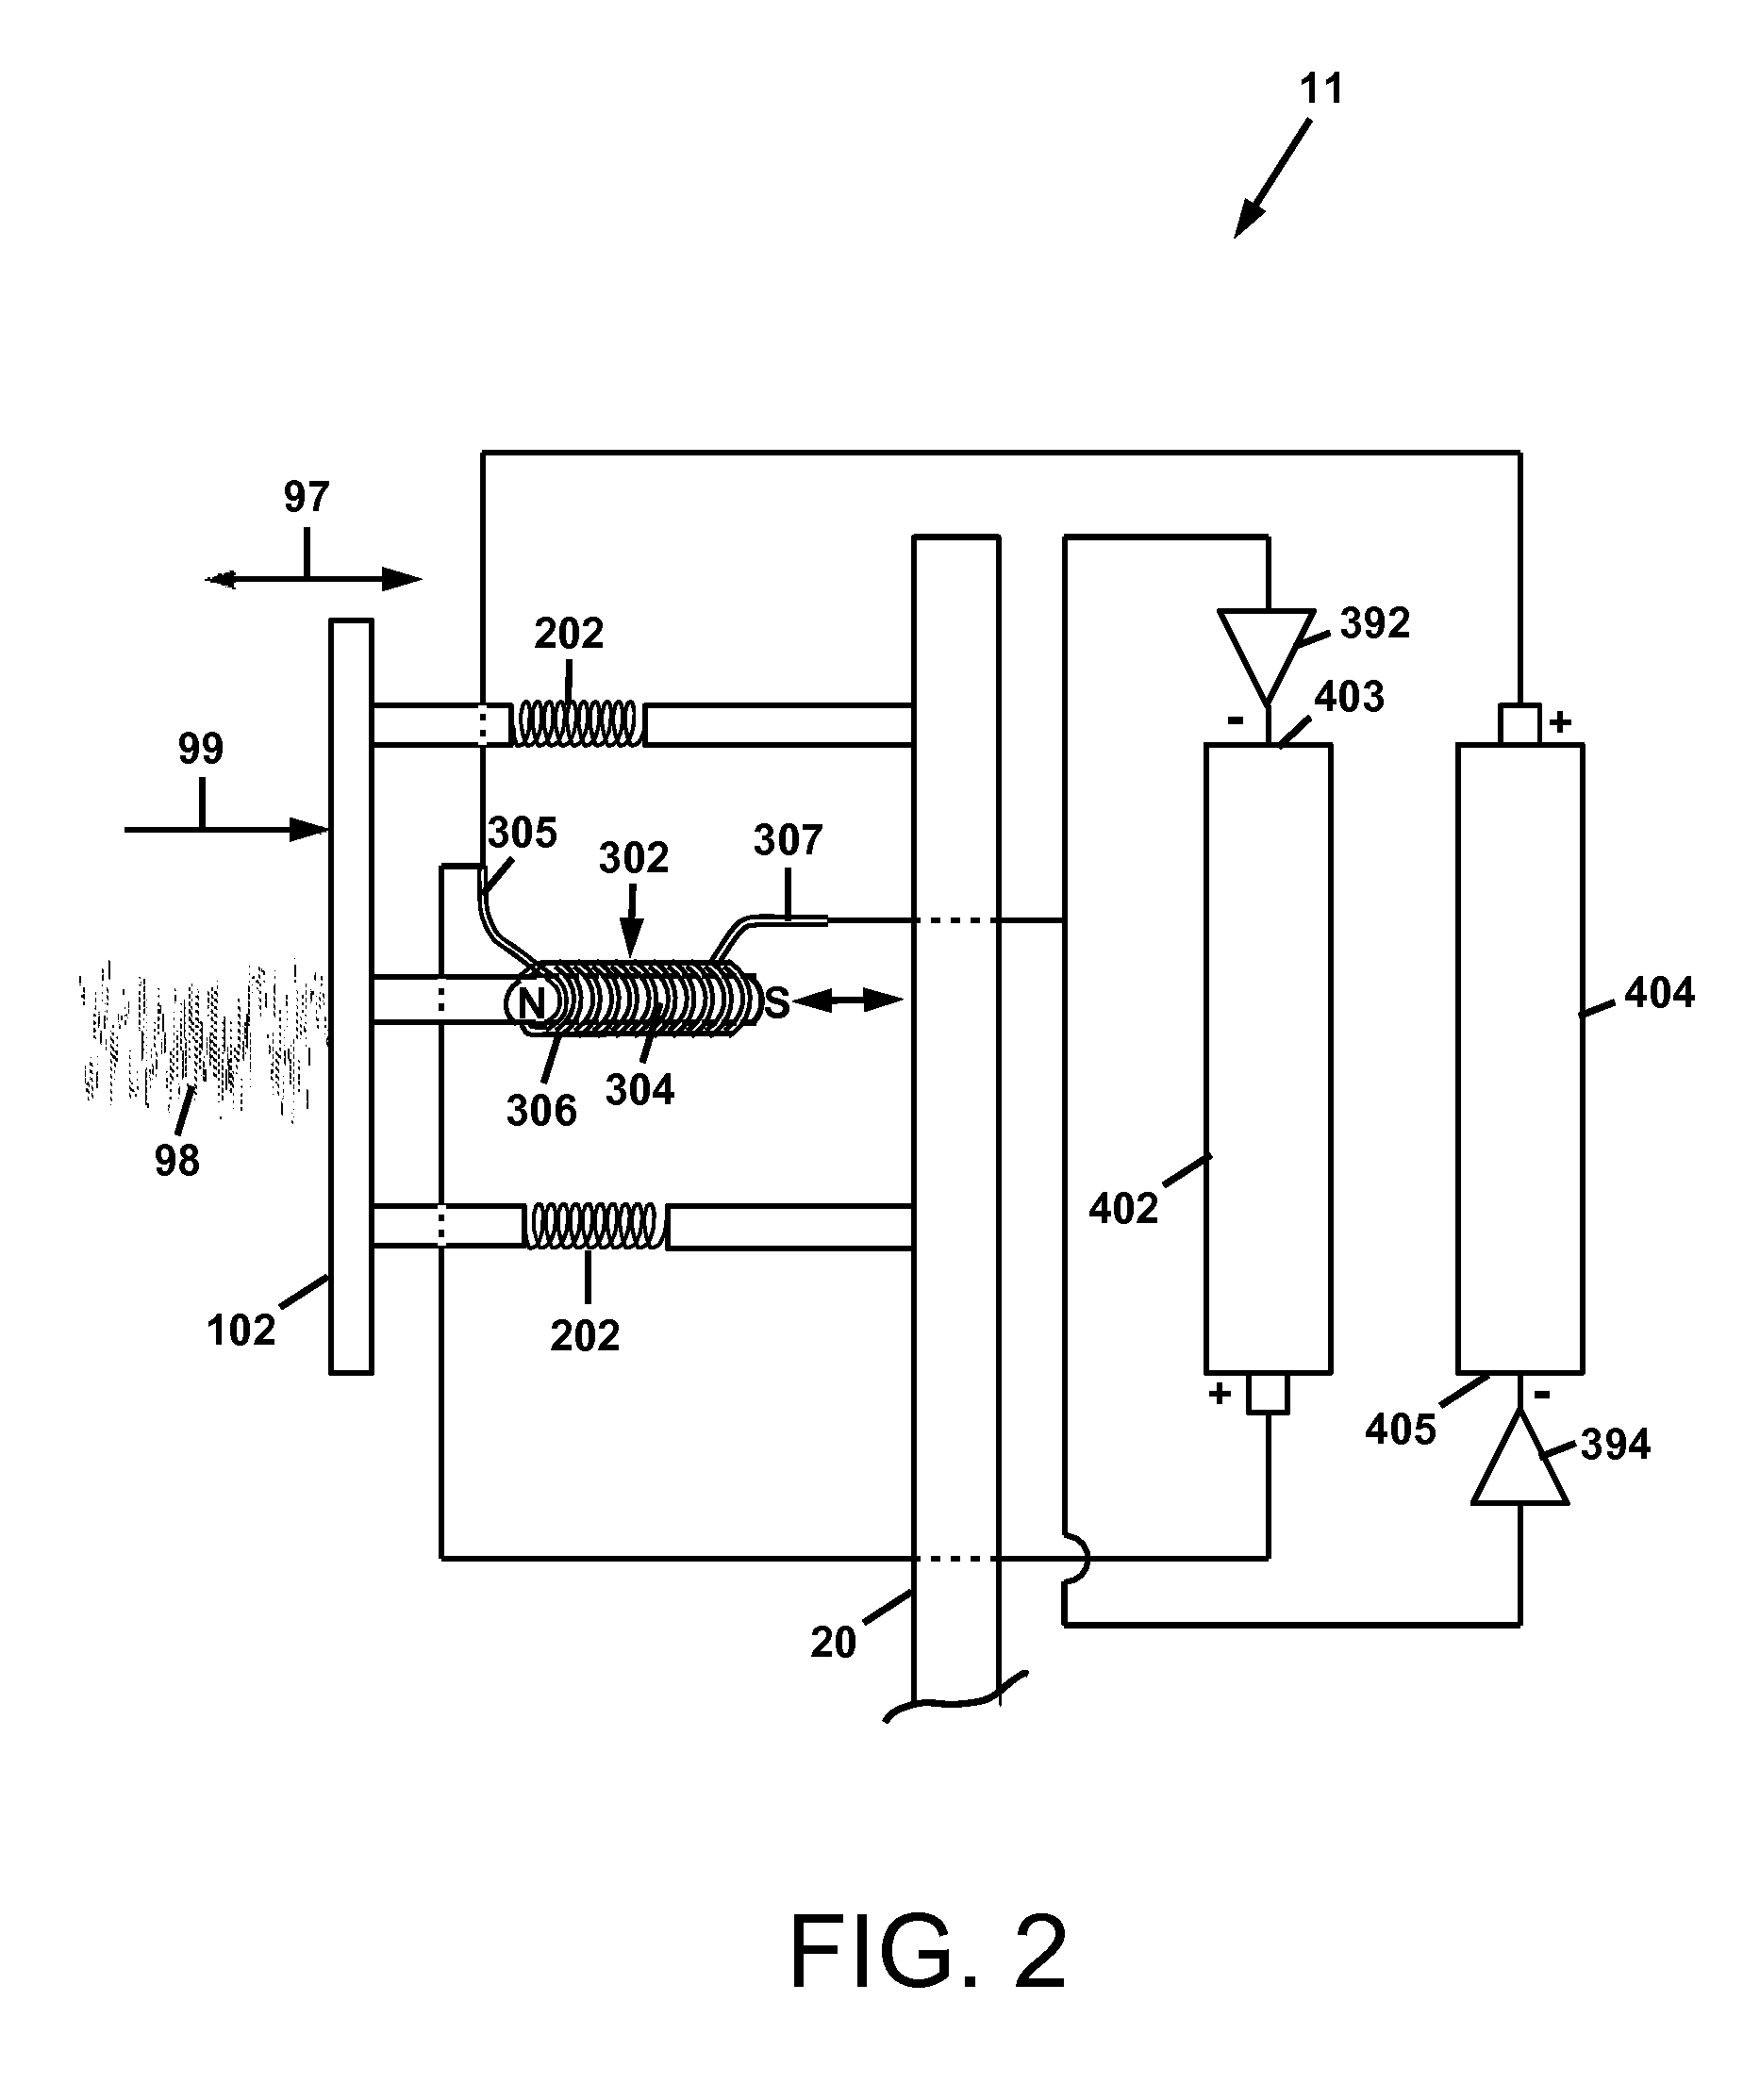 Apparatus and methods for recovery of variational wind energy